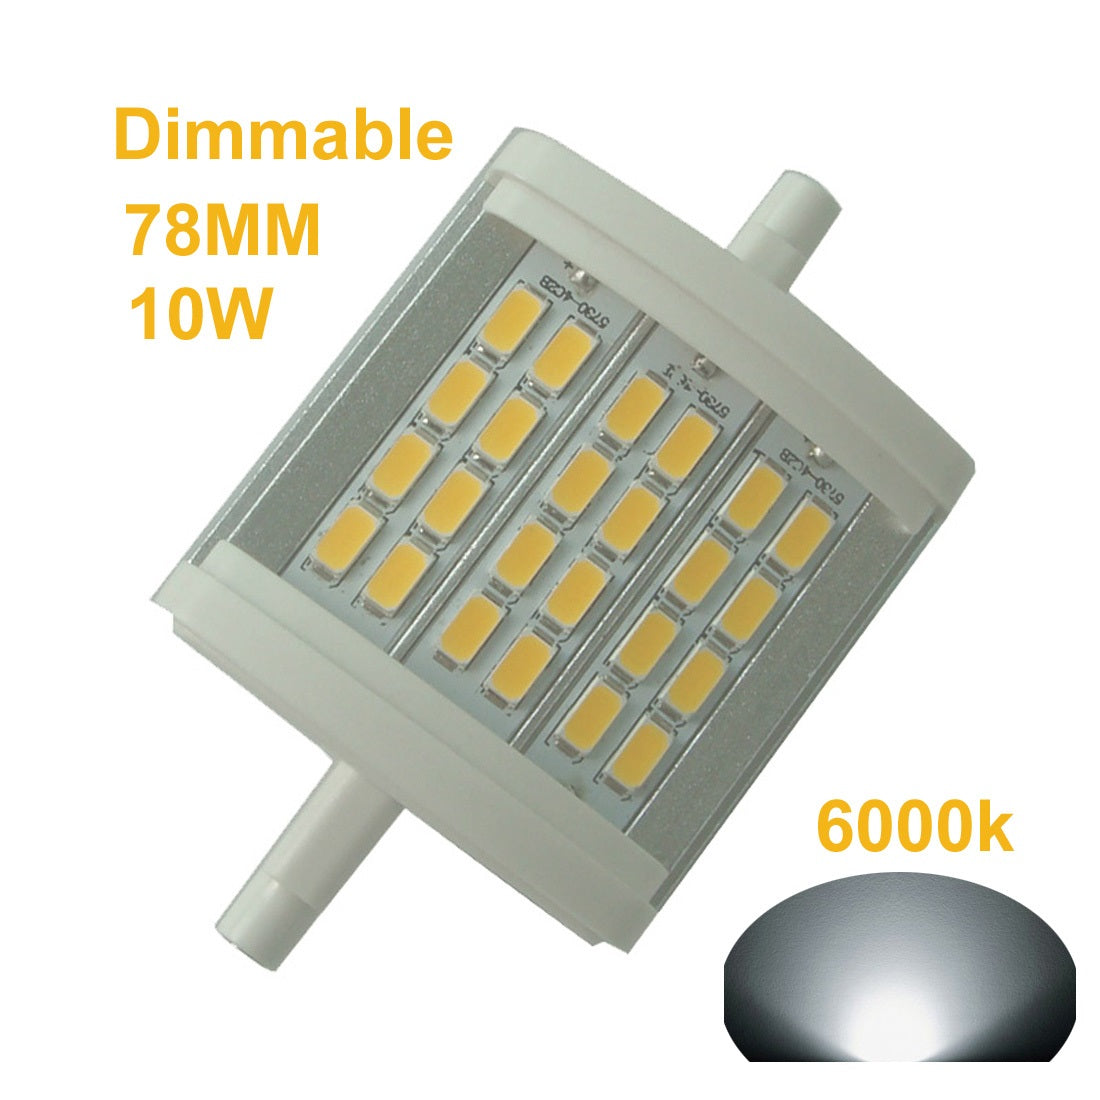 R7S LED J118 118mm Dimmable Bulb - Warm Light, 3000LM, 3000k, AC120V -  Halogen Replacement 